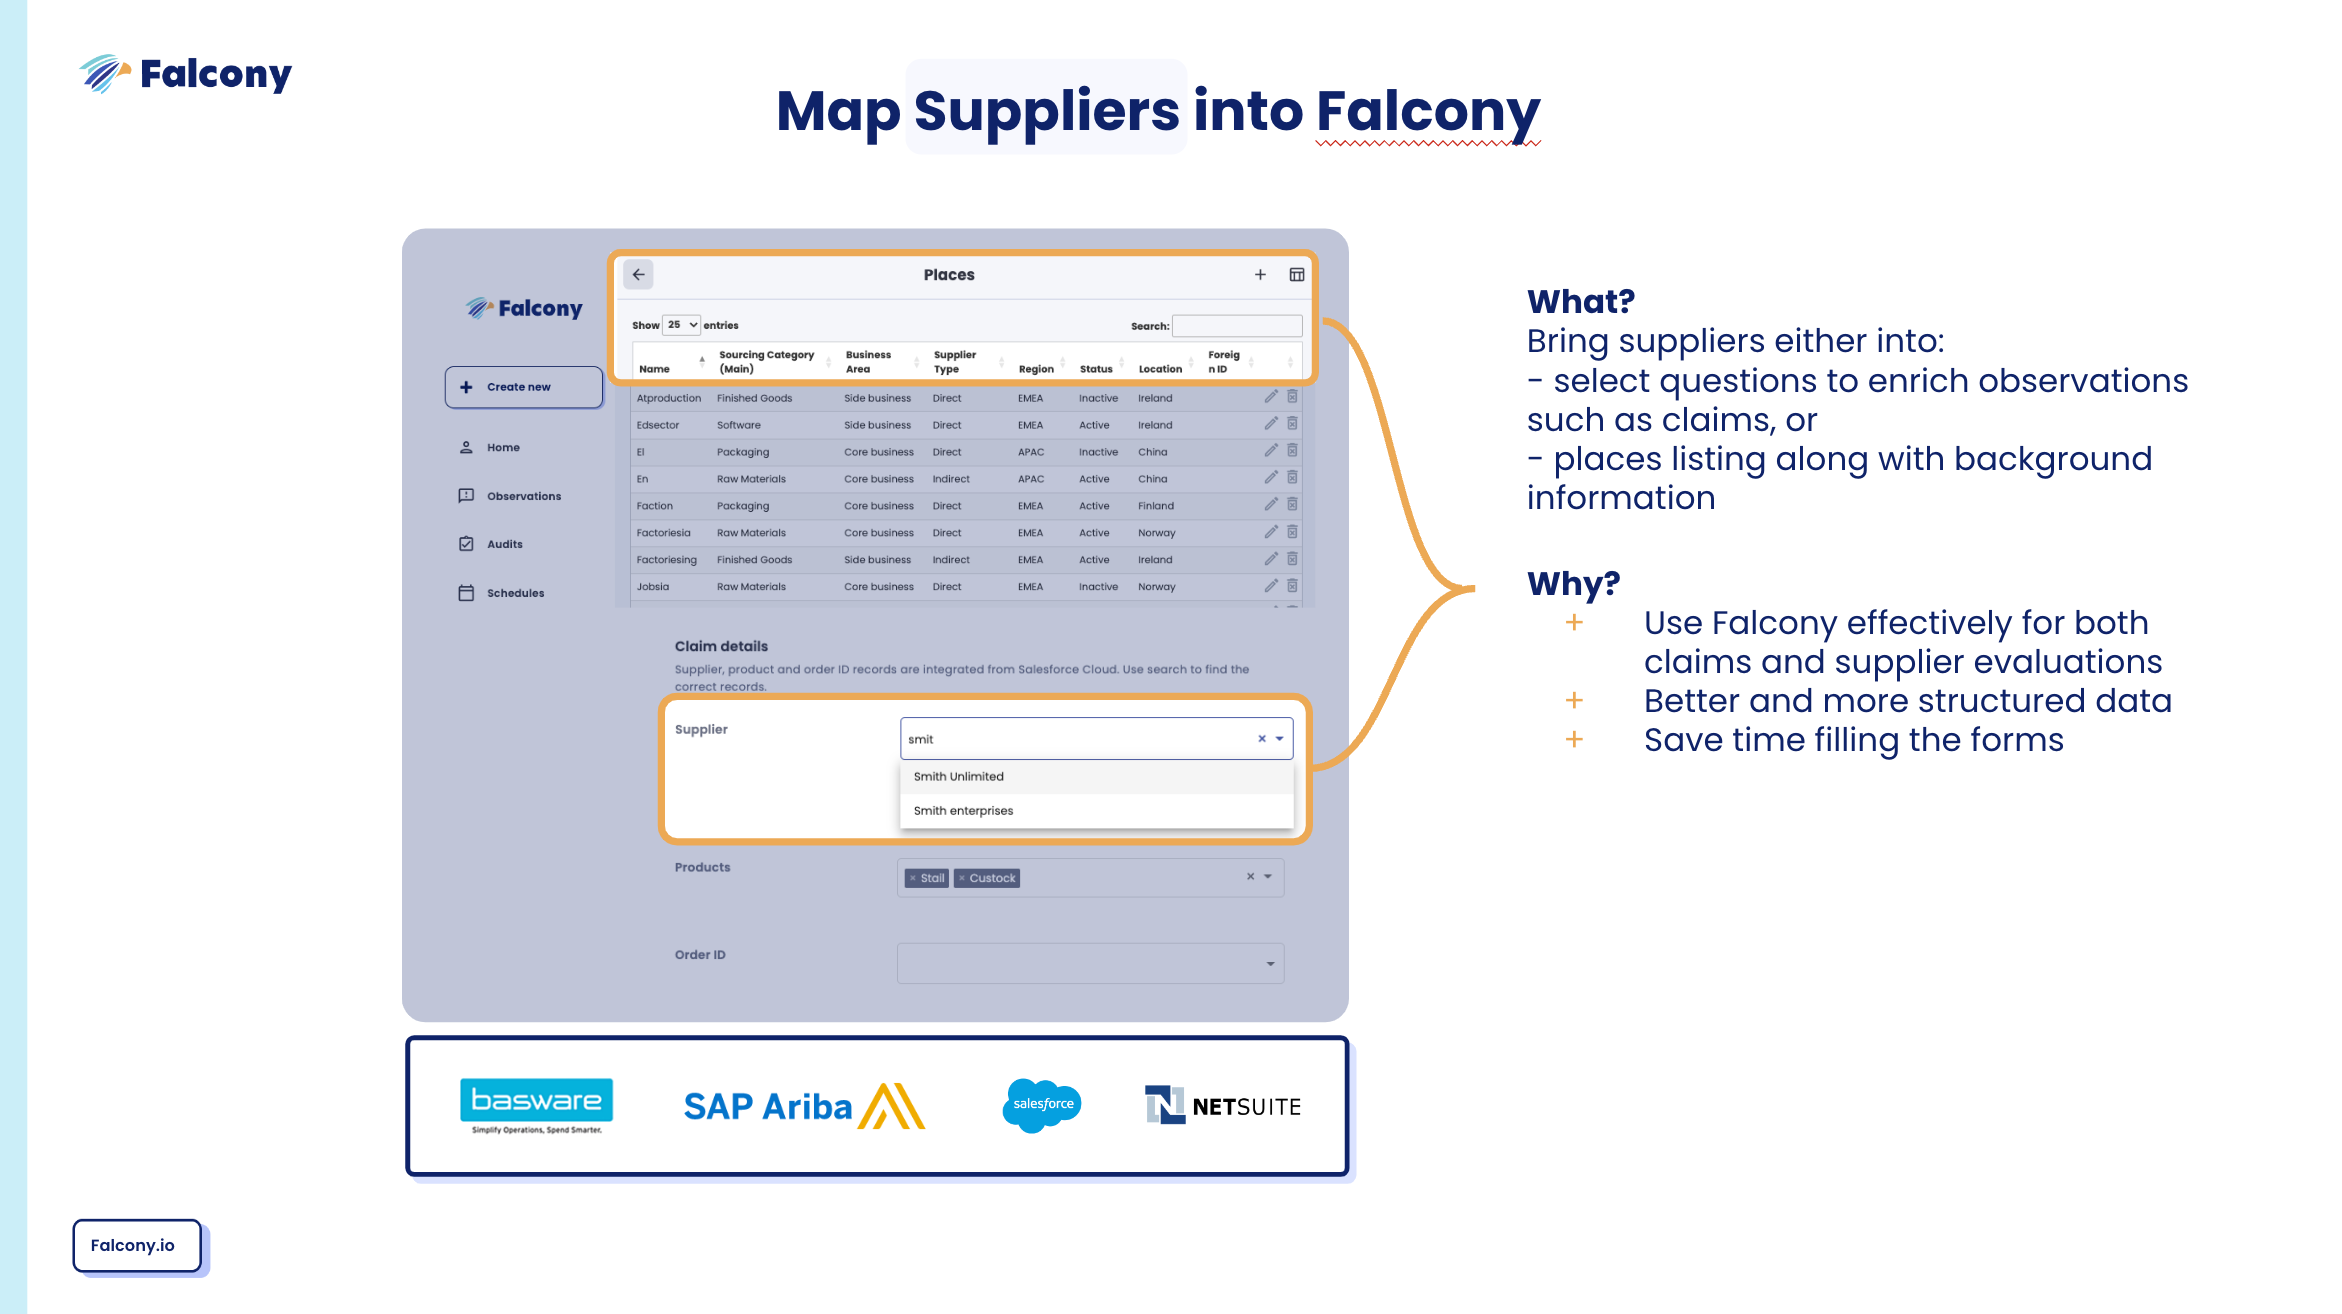 Map suppliers into Falcony